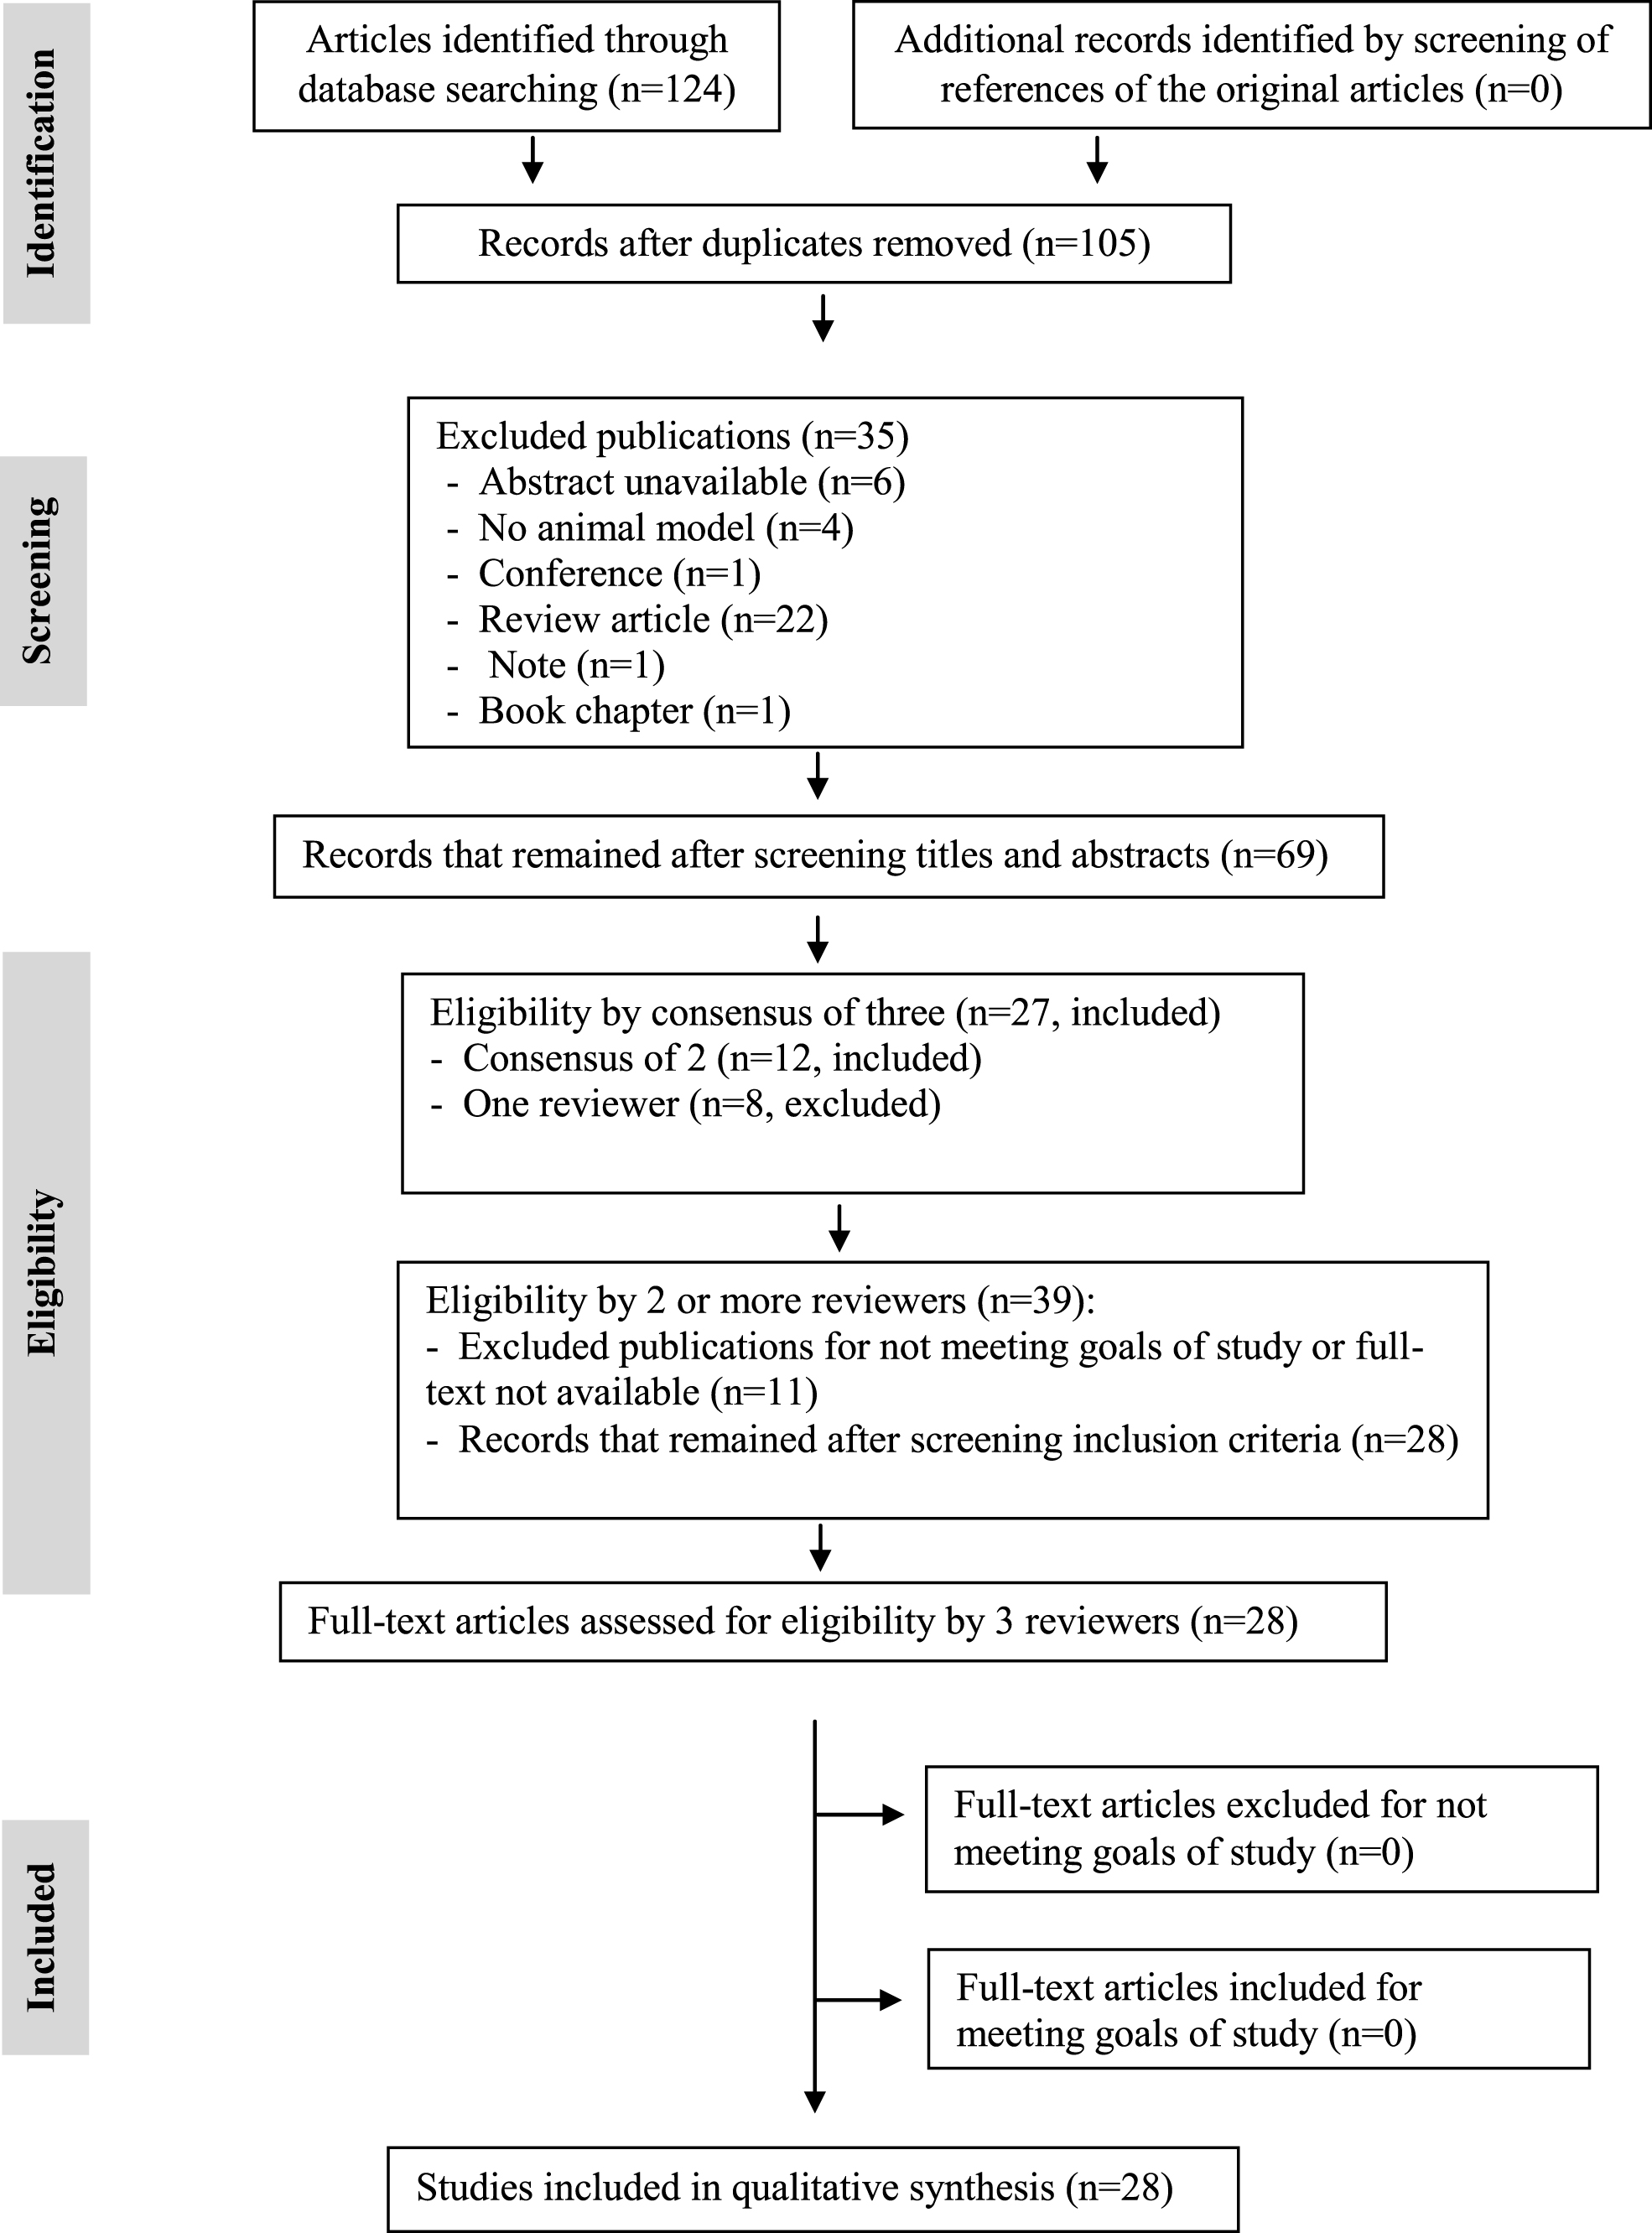 PRISMA flowchart with selection criteria of included articles in the systematic review of DNA immunotherapy in Alzheimer’s disease in animal models.